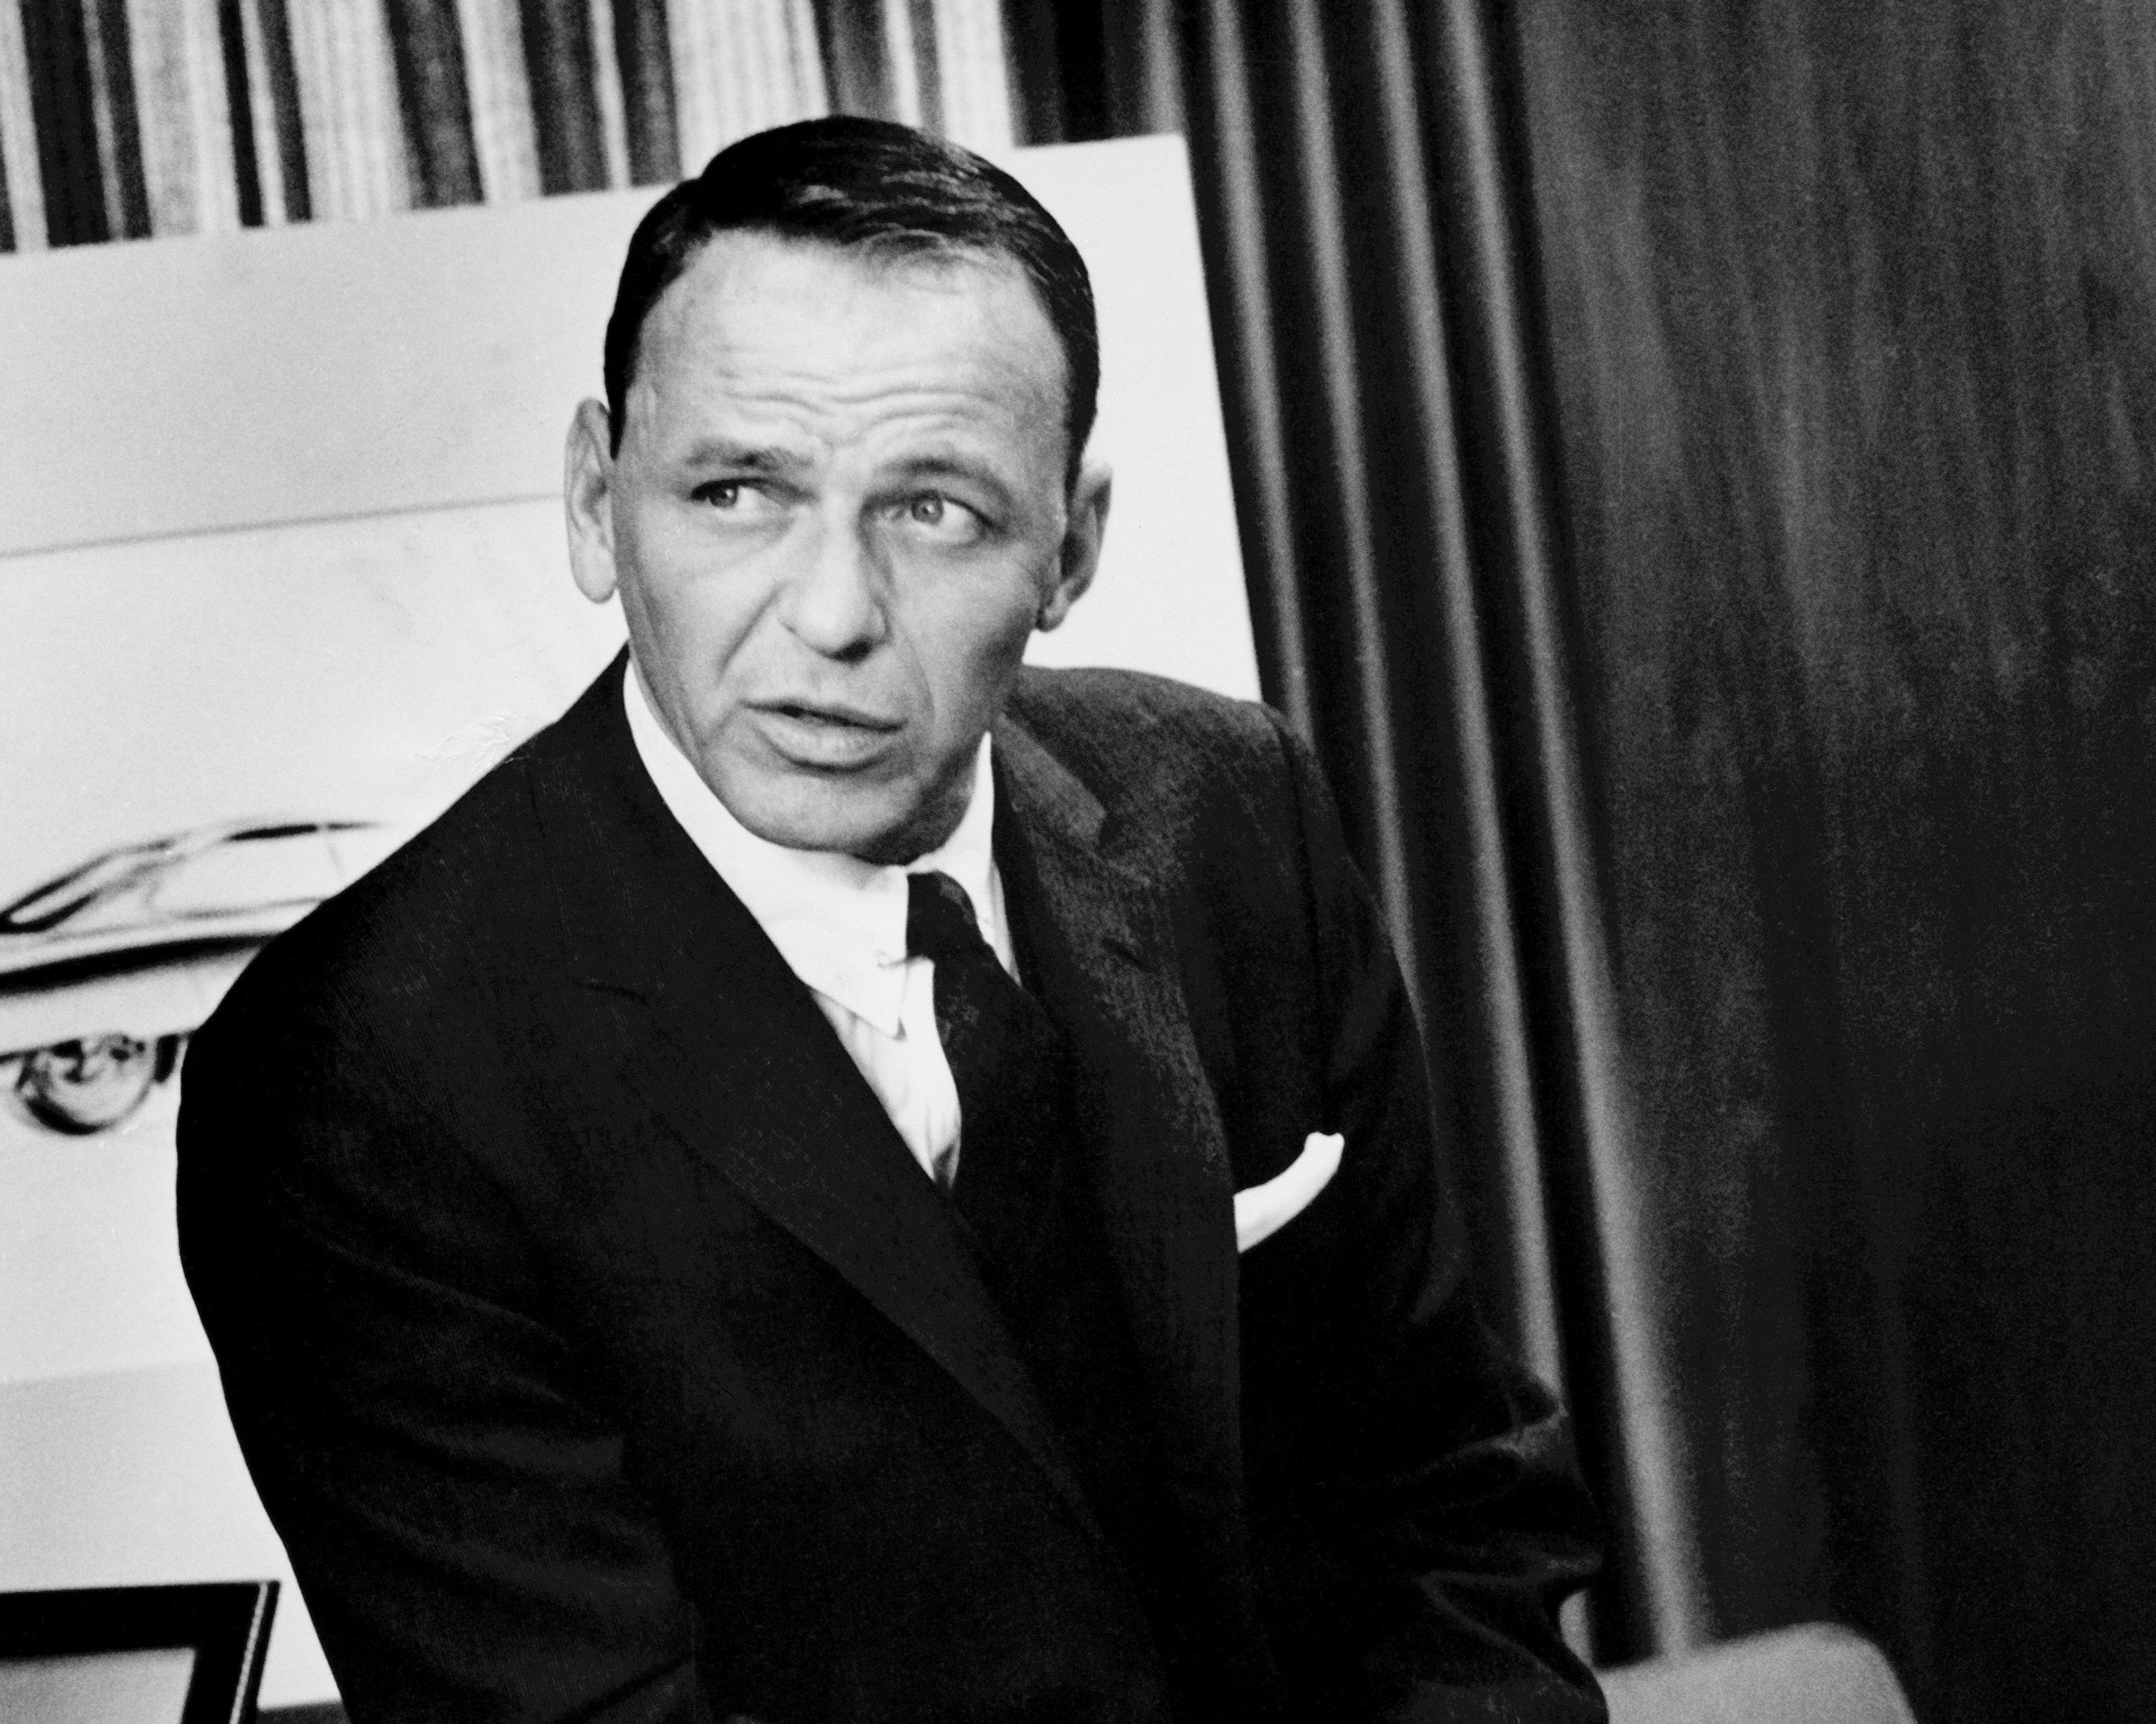 A black and white photo of Frank Sinatra wearing a suit.